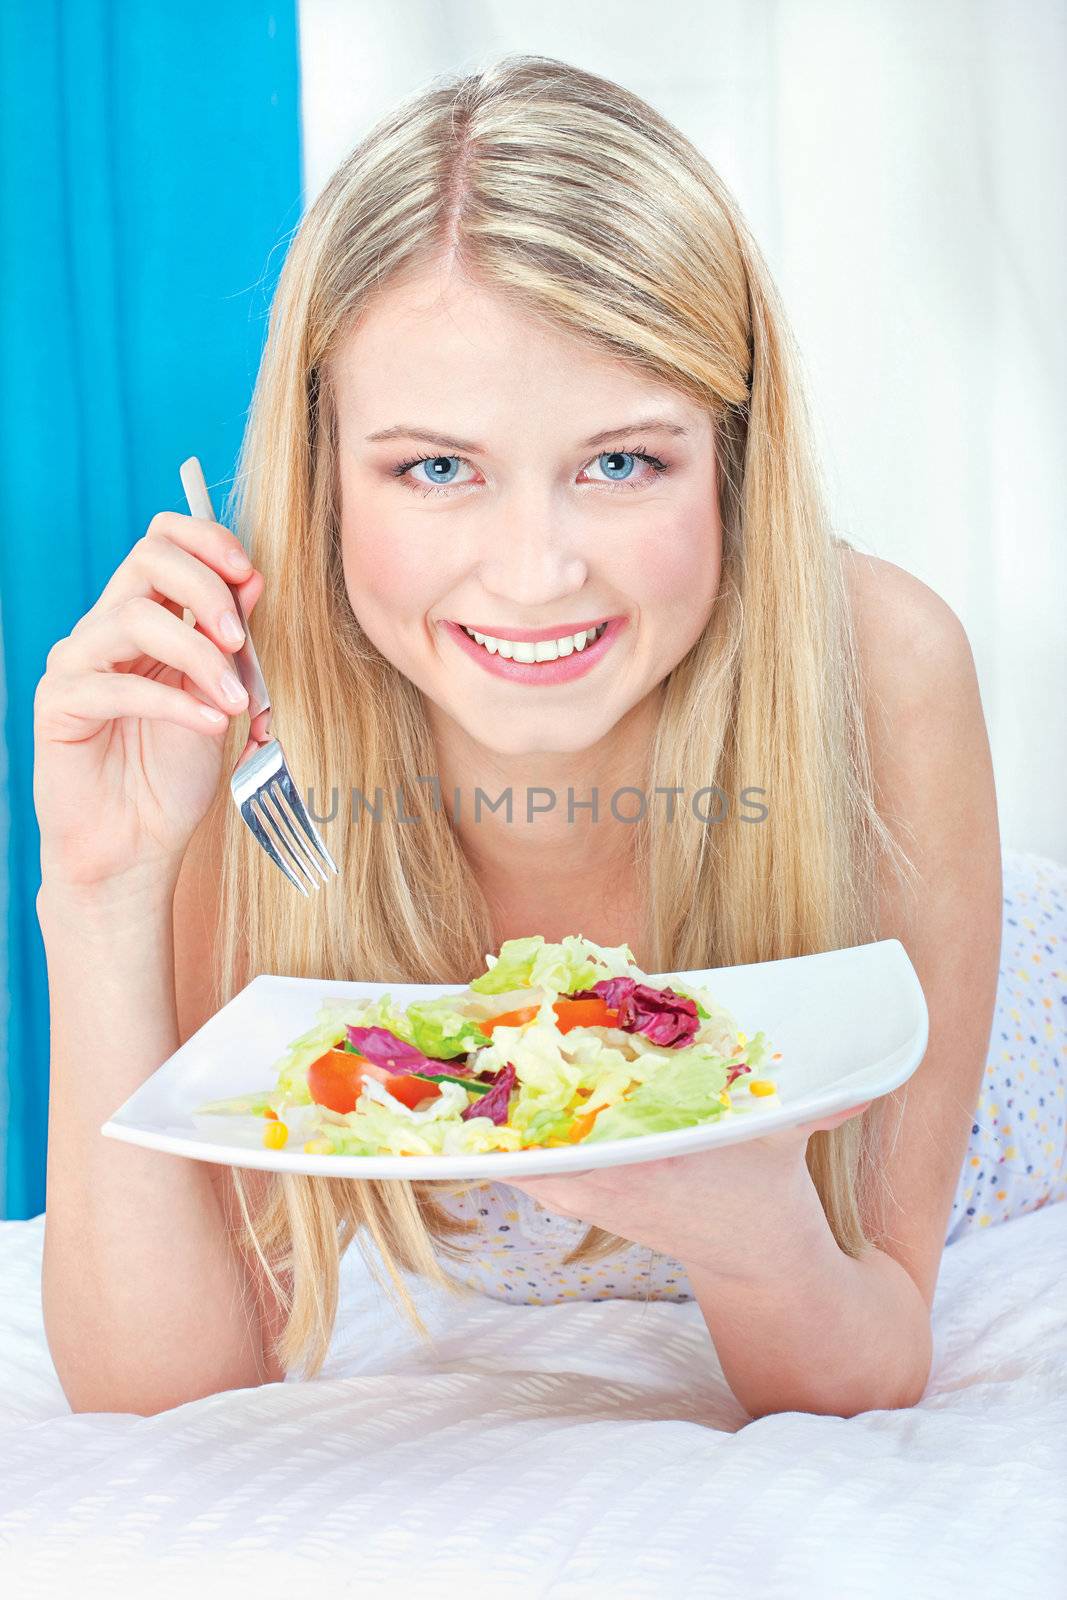 Pretty smiled woman eating salad in bed